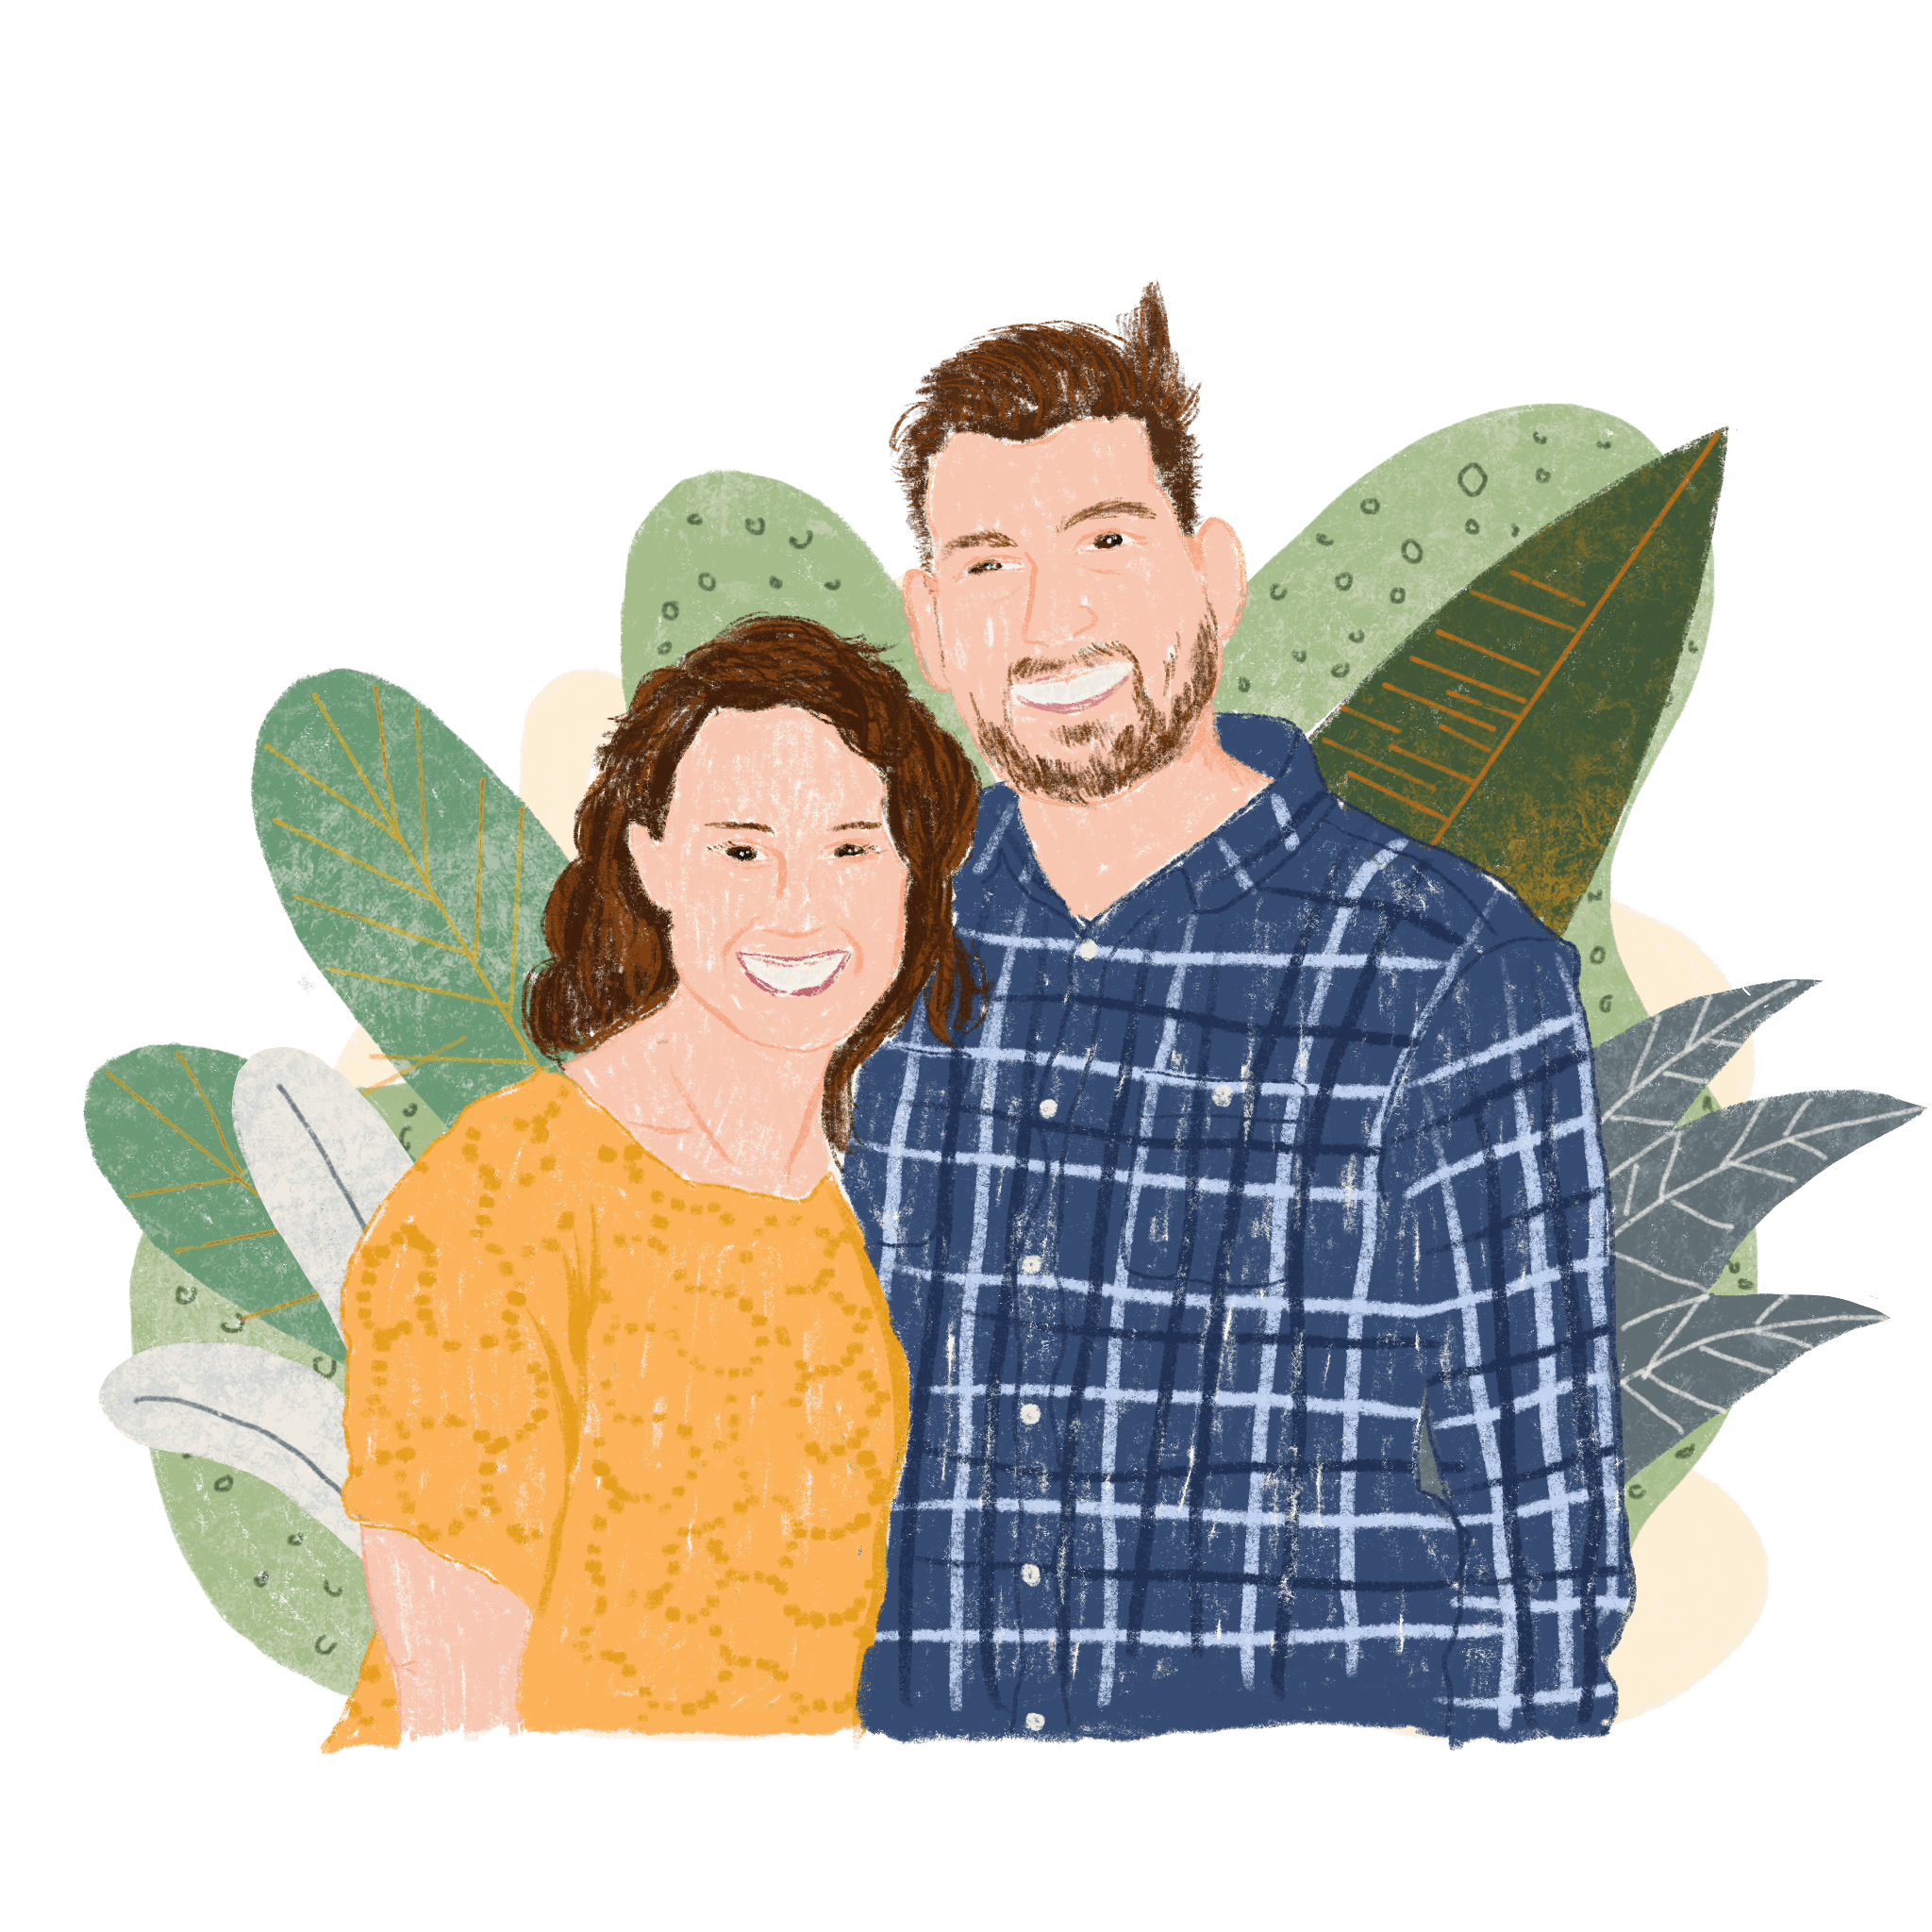 A portrait of Pastor and his wife